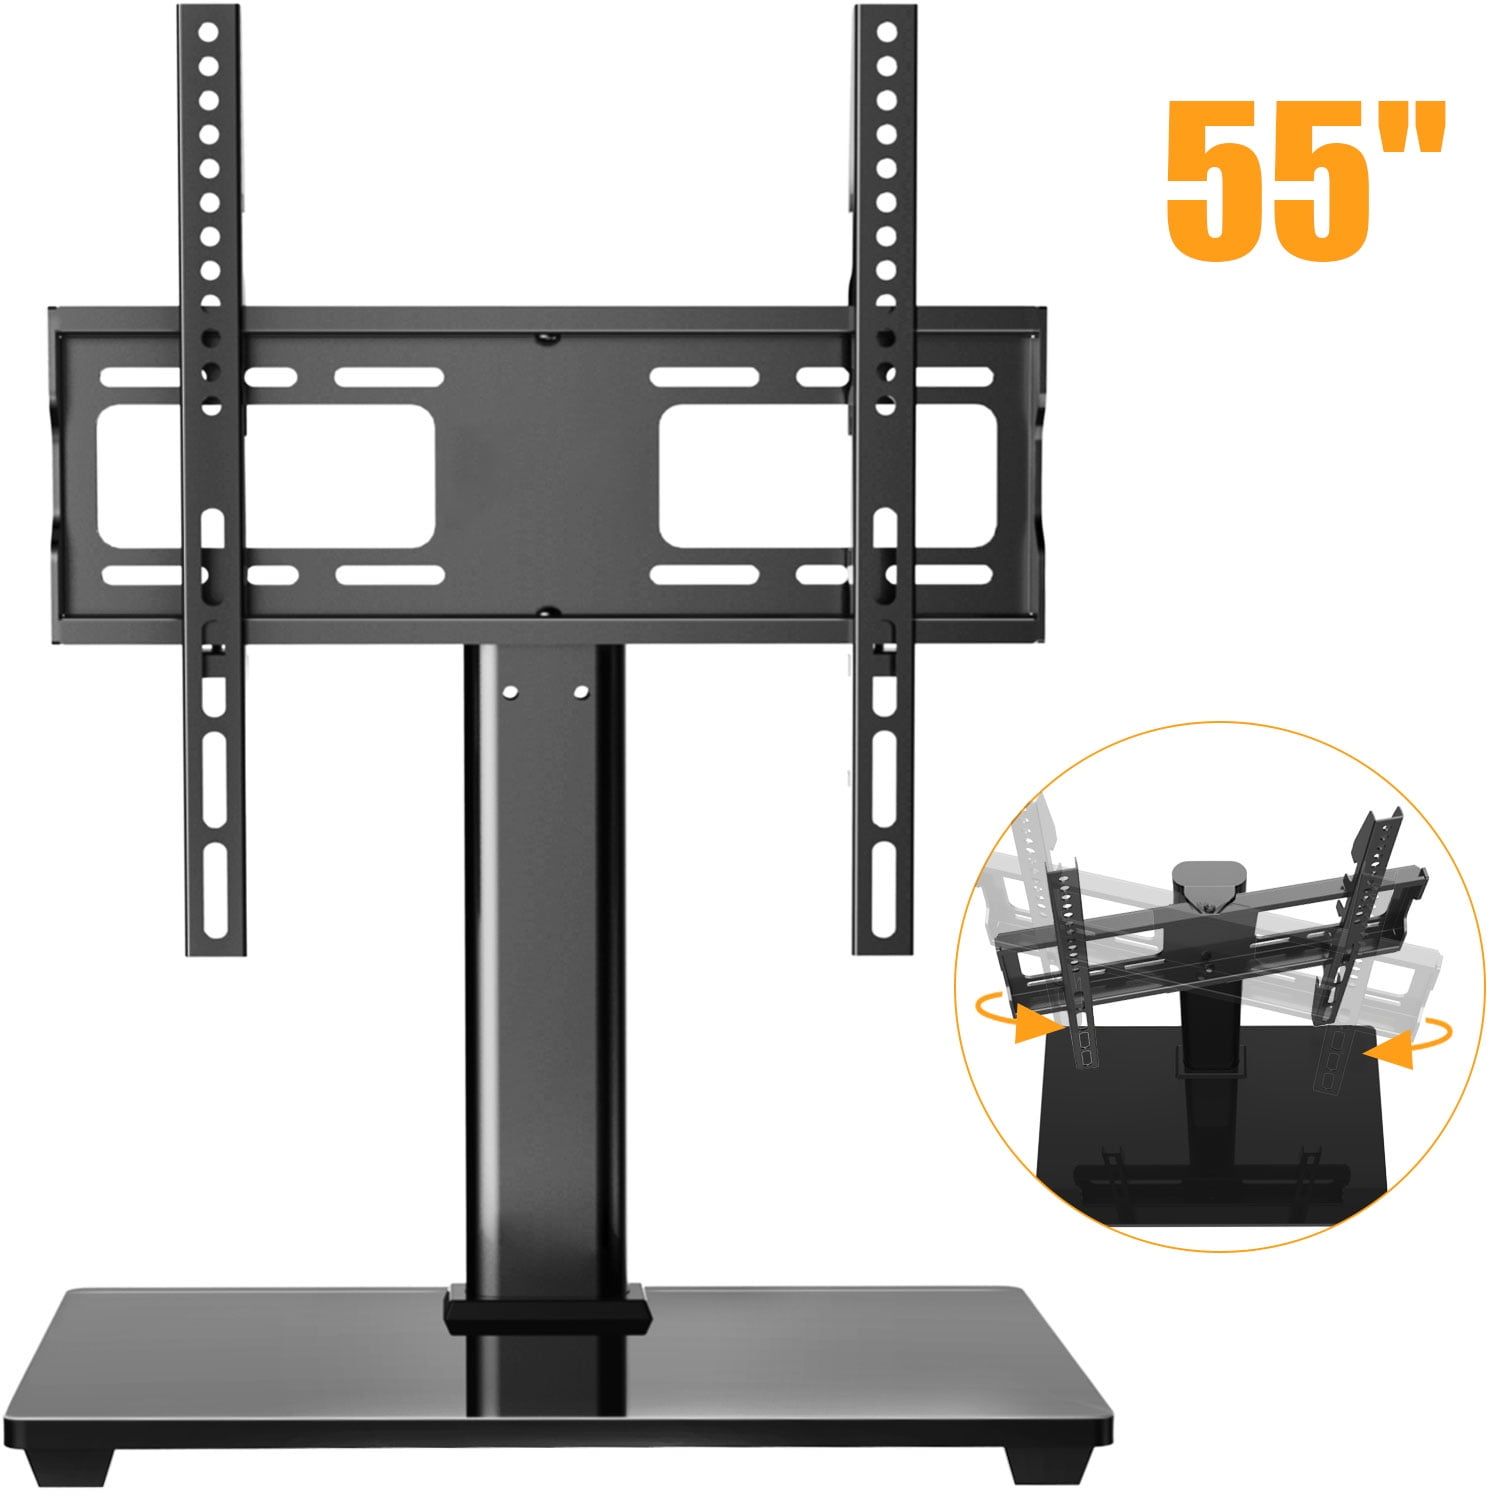 Universal Tv Stand Adjustable Height Tabletop Tv Stand Fits 32 55 Inch Tvs,  Hold Up To 88lbs, Max 400x400mm – Walmart With Regard To Universal Tabletop Tv Stands (View 4 of 15)